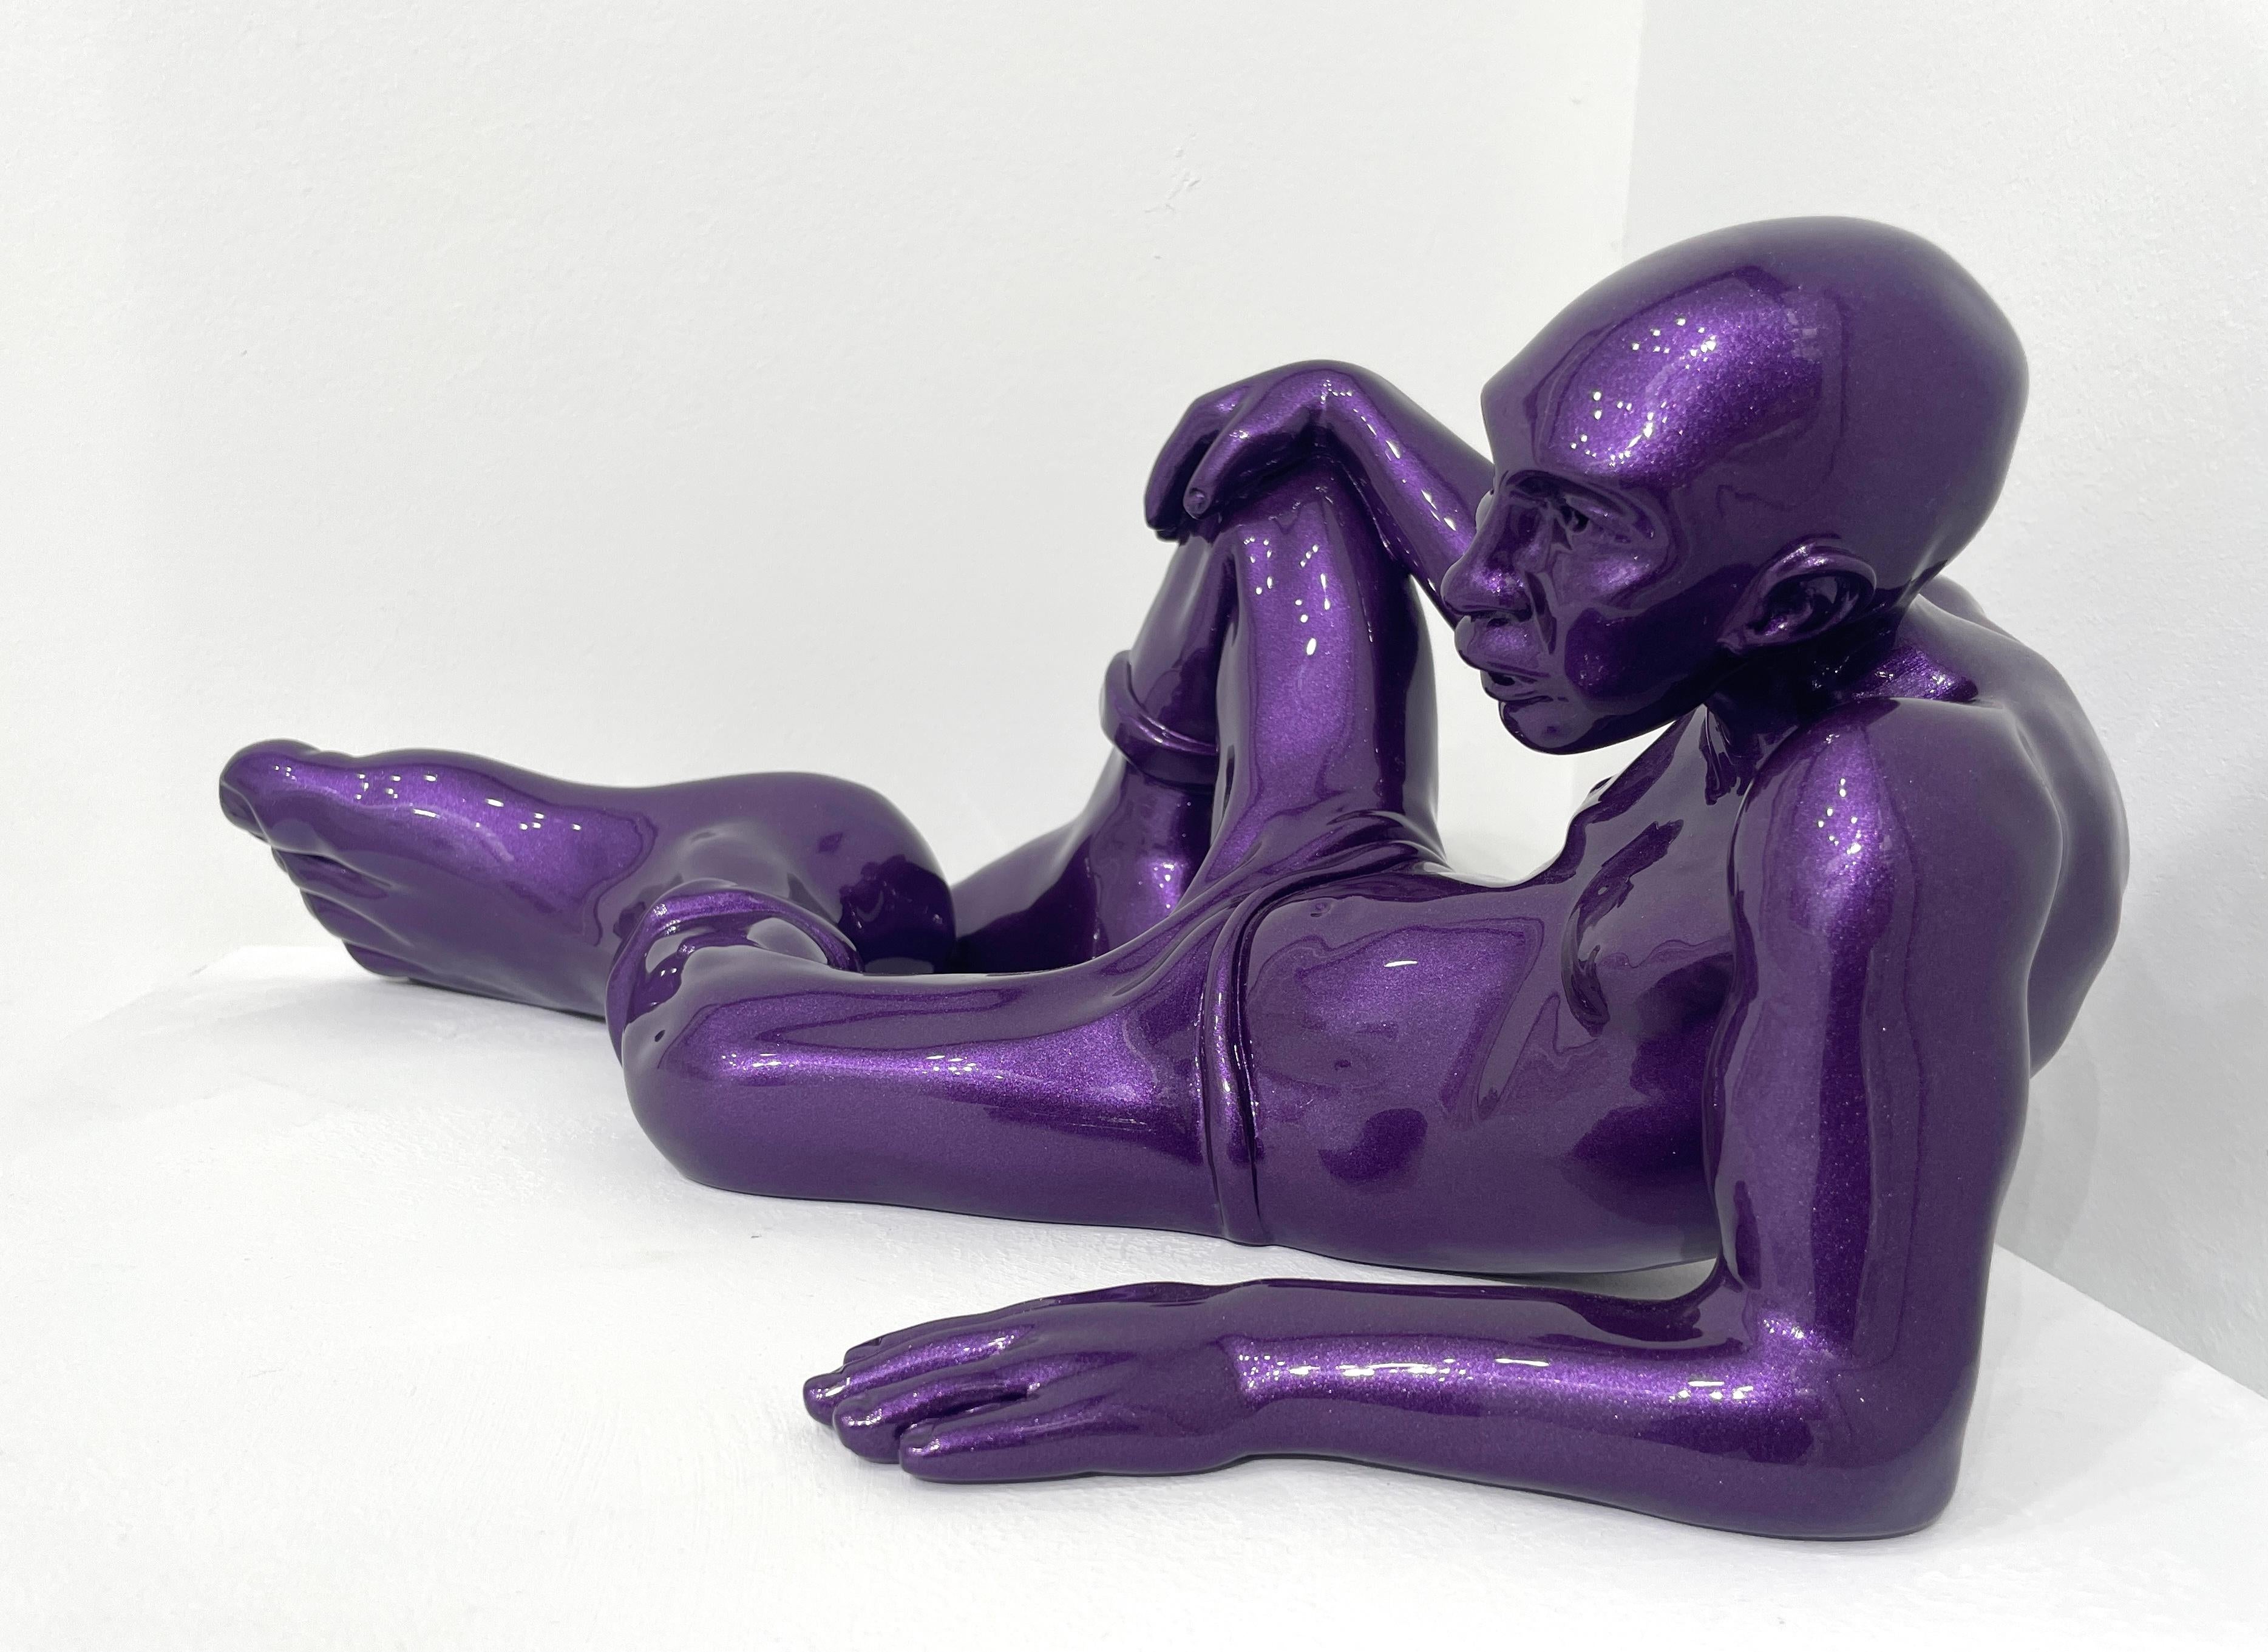 Artist: Idan Zareski, French-Israeli
Title: Coolfoot 50 Resin Purple
Media: Resin
Edition of 8 + 4 AP
- - 

About the artist: 

Born in Haifa, Israel in 1968, Idan Zareski has had a non-conventional yet surprising journey. Very young he was immersed